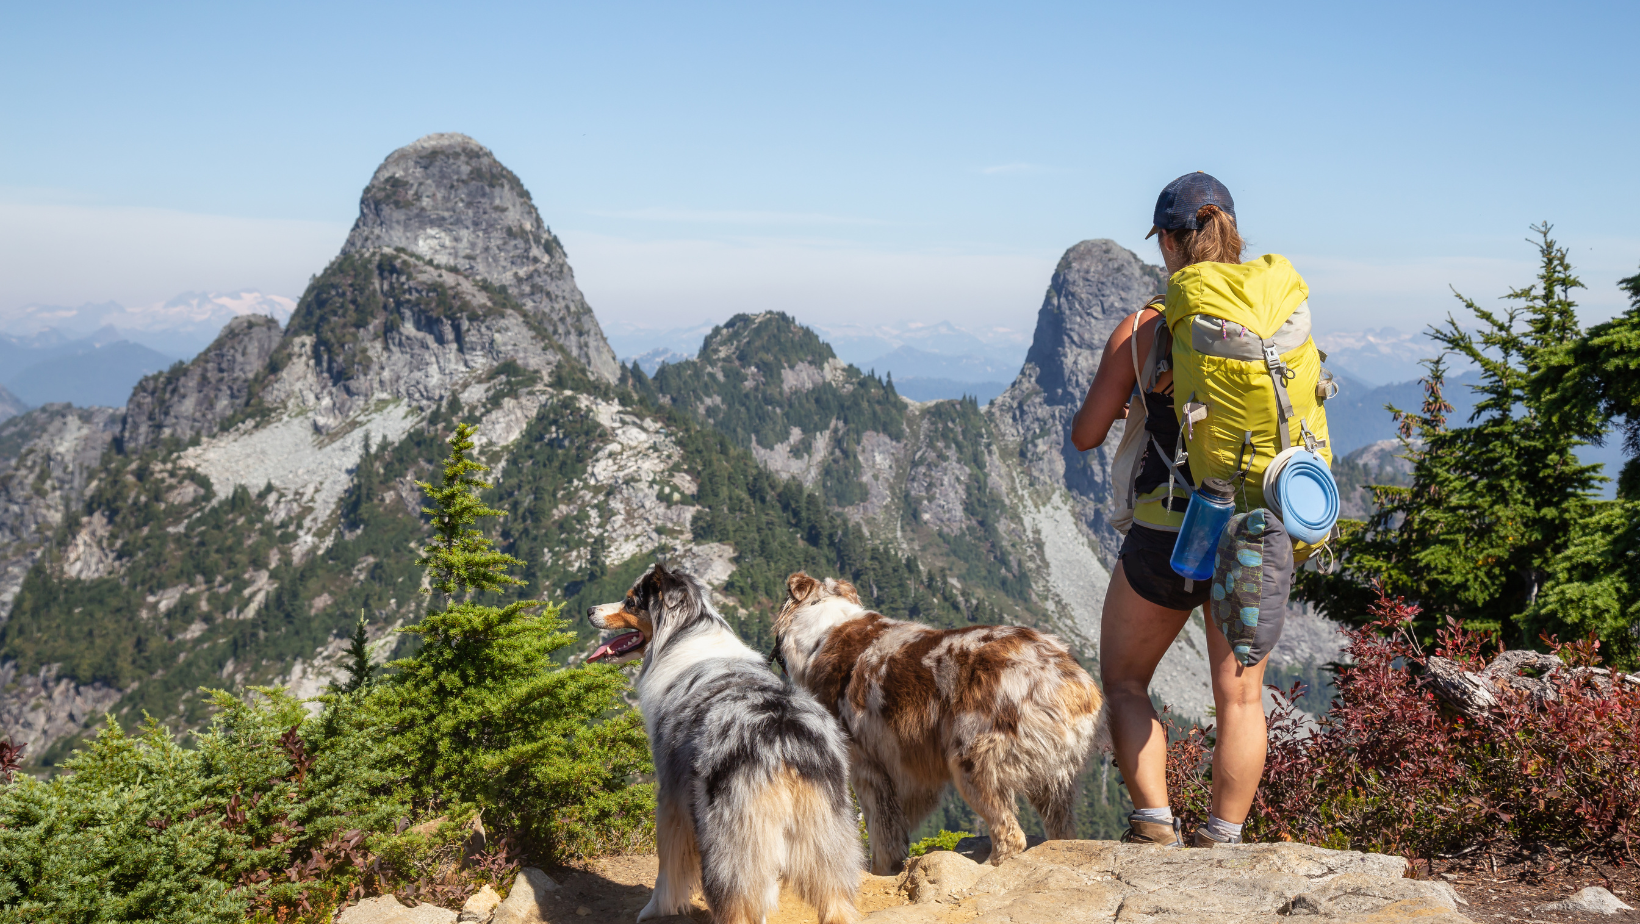 Tips for hiking with your dog